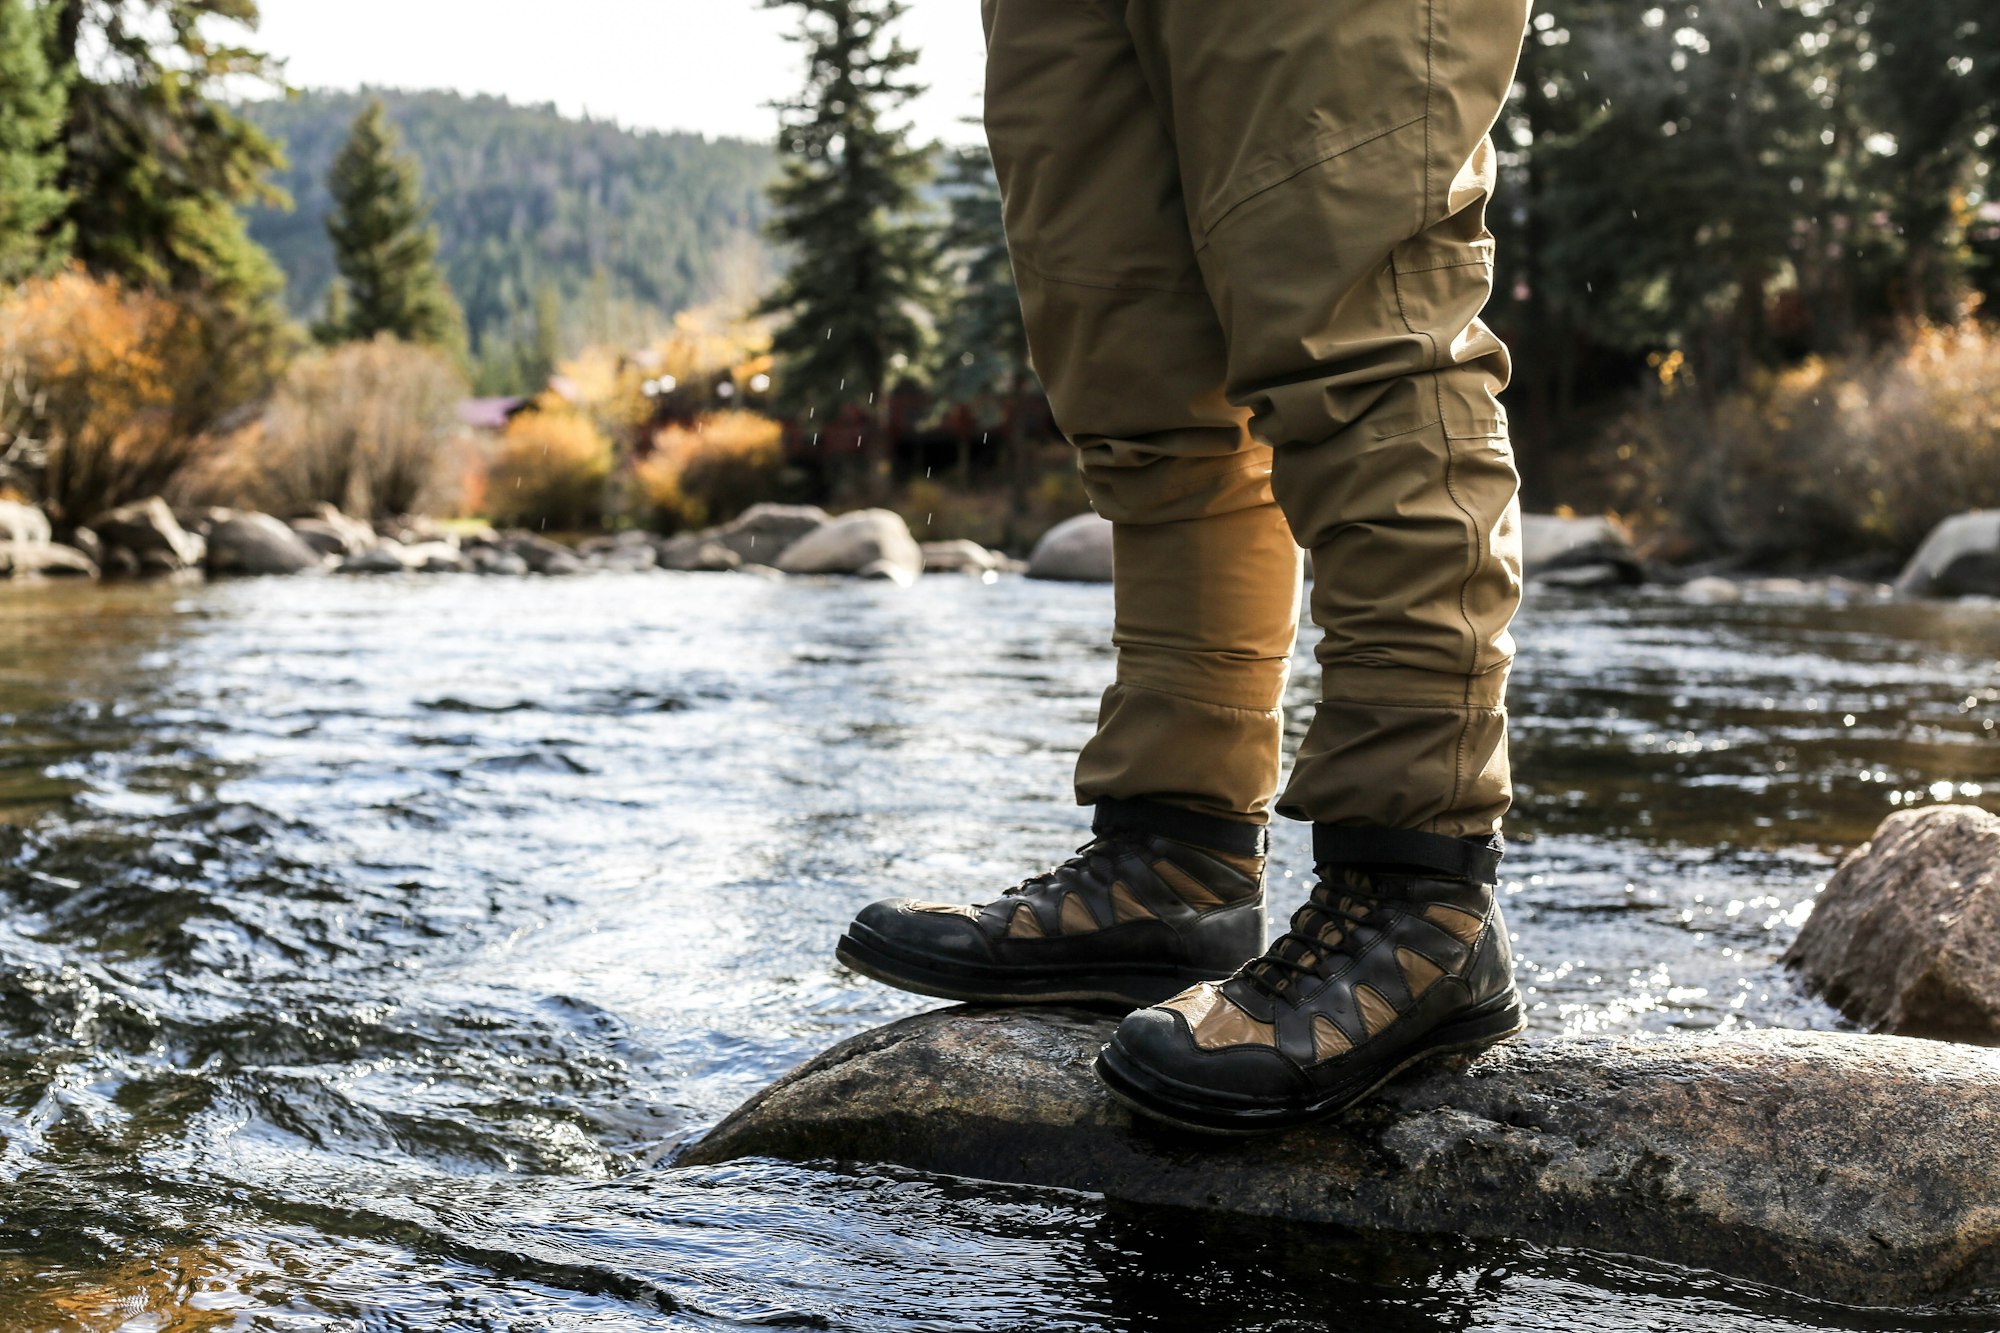 Photo by Taylor Grote - Stocking Foot Waders with Wading Boots